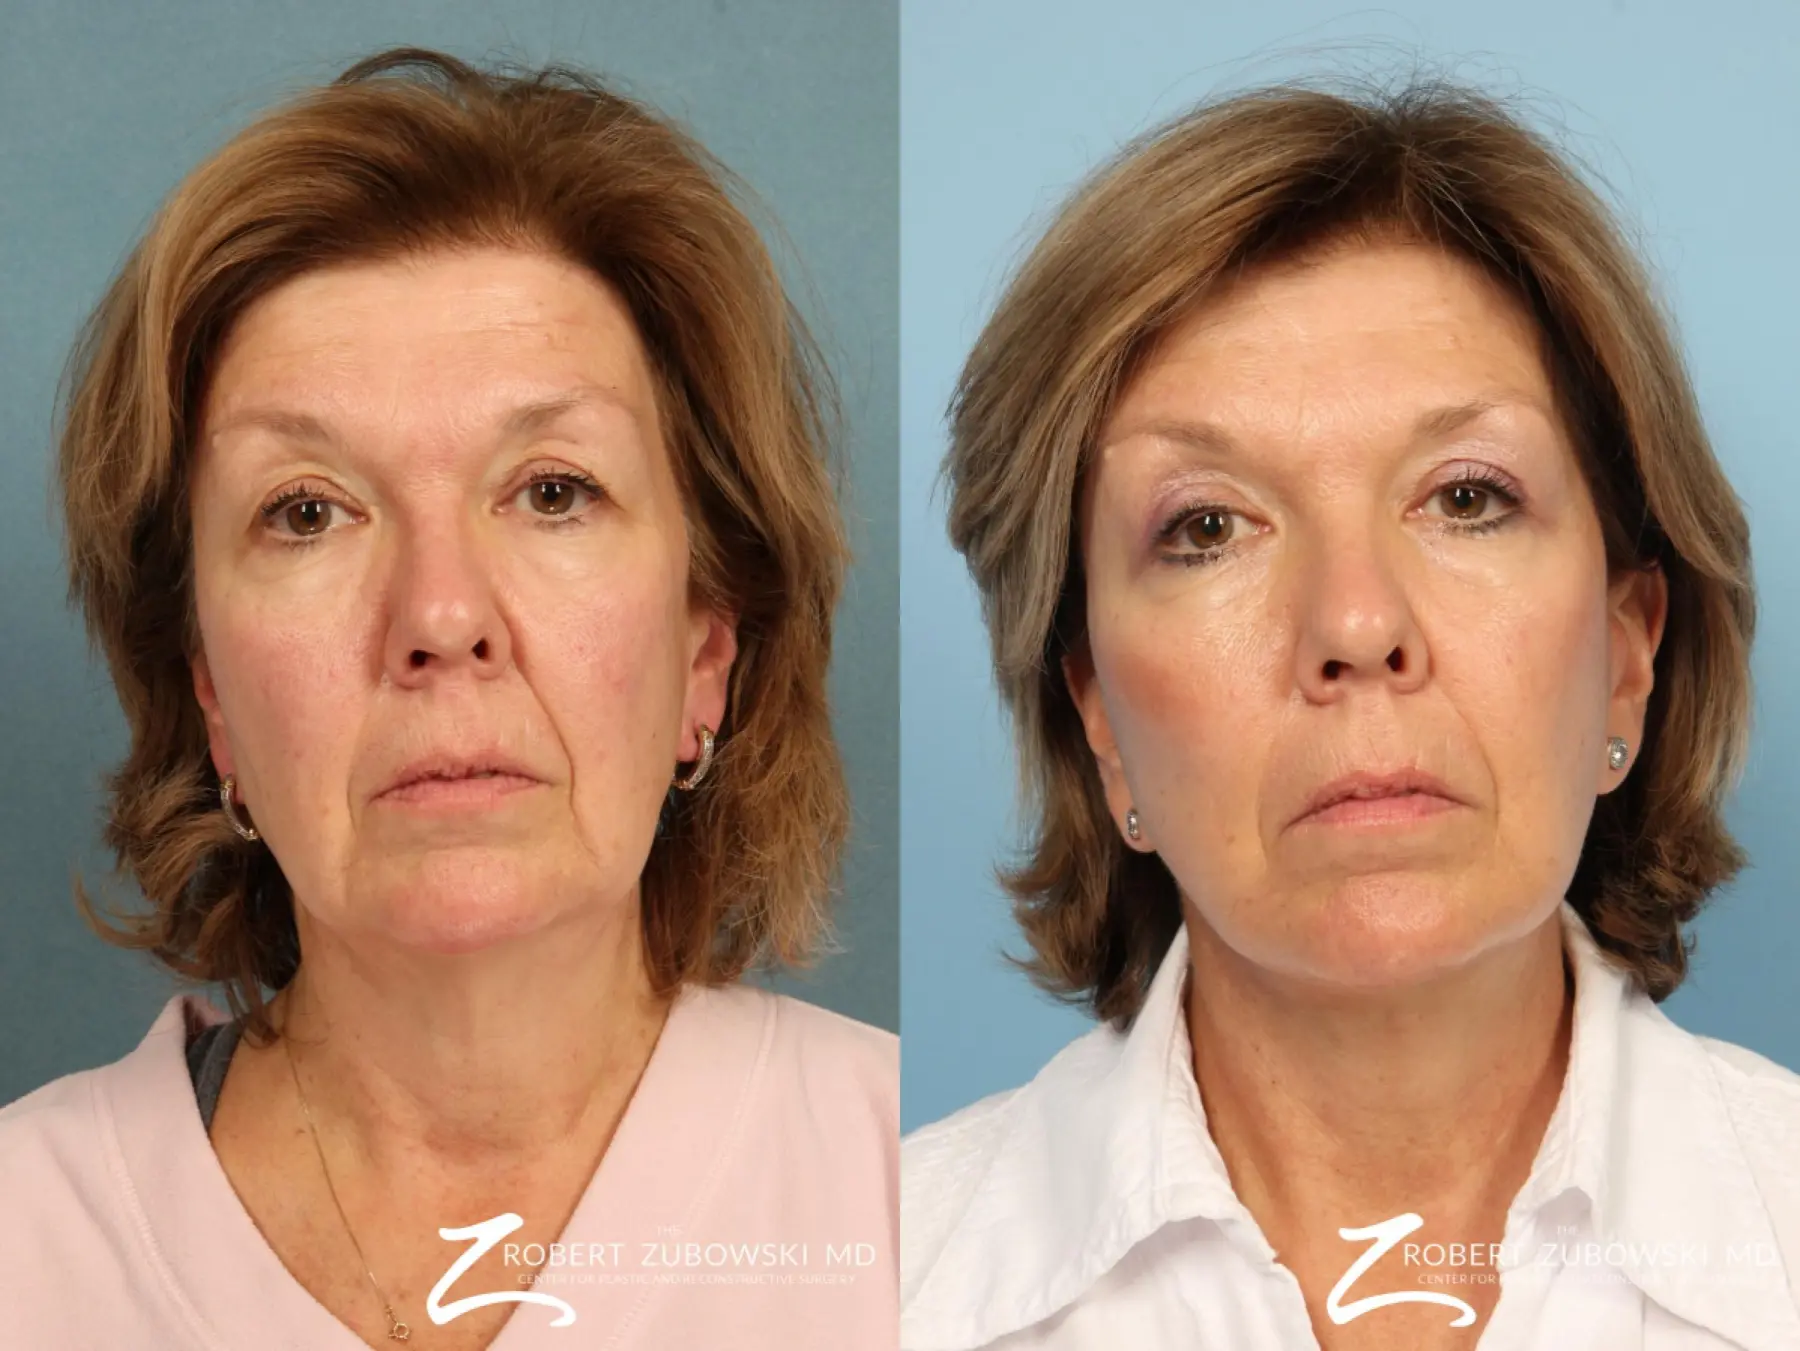 Facelift: Patient 3 - Before and After 1